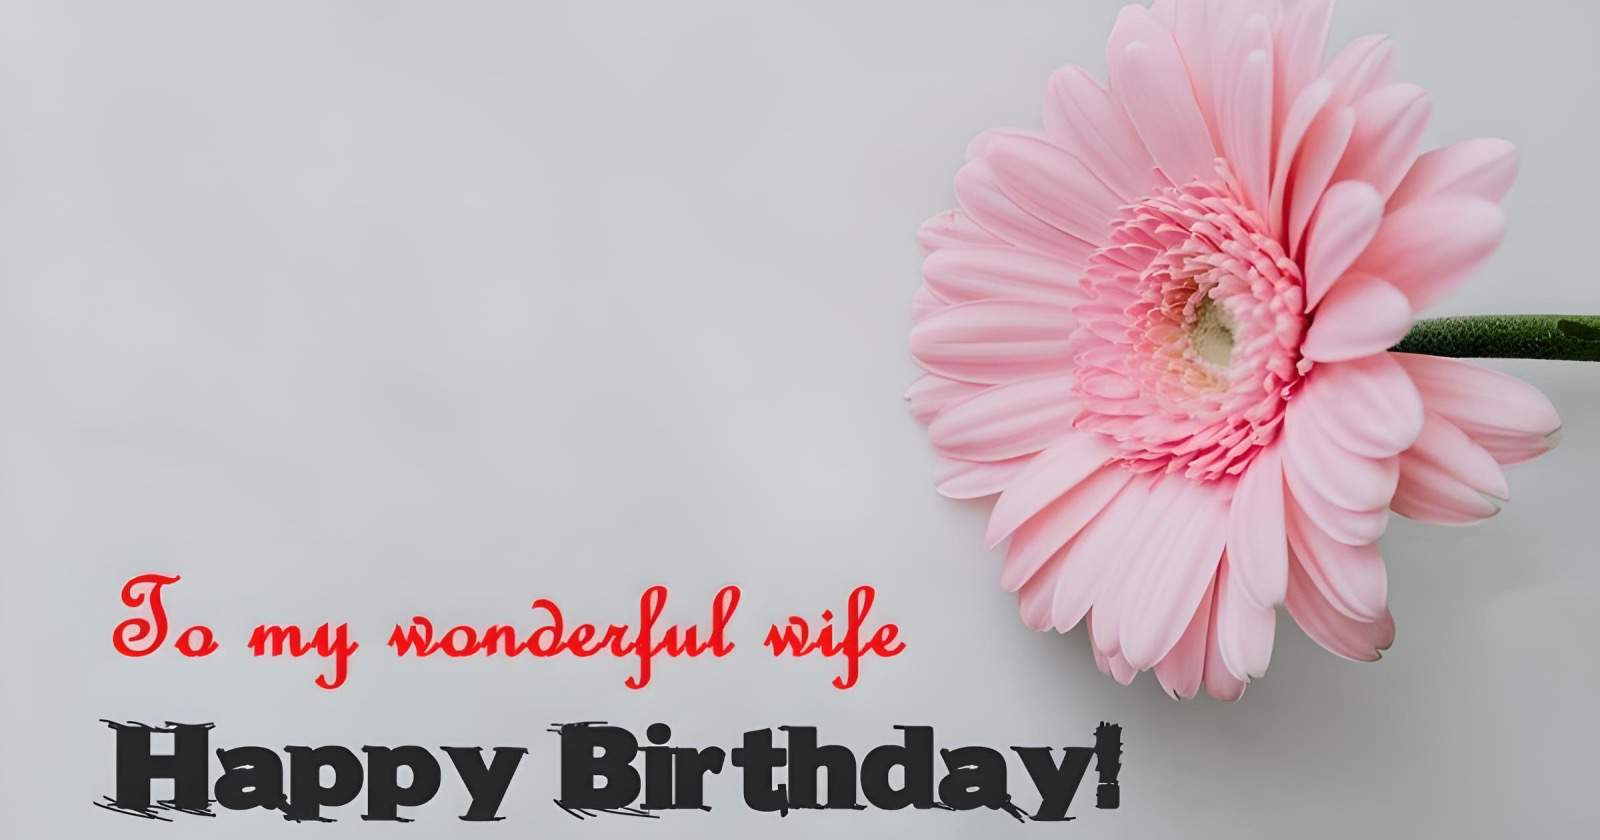 Happy Birthday Messages and Wishes for Wives